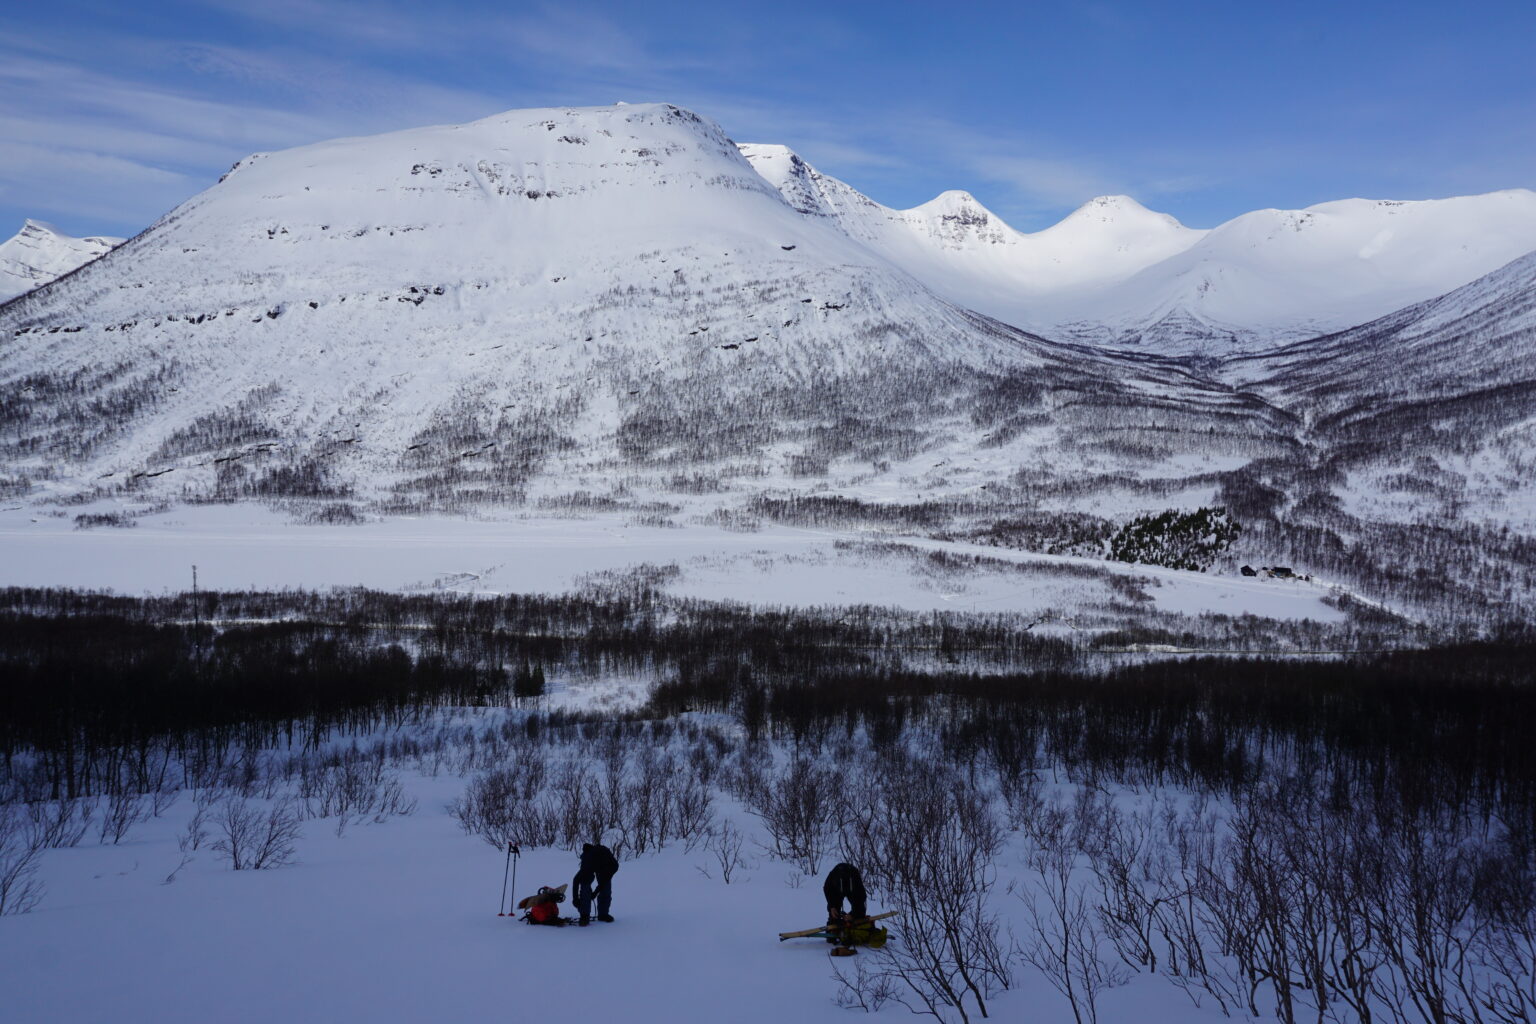 Heading higher up the slopes with the Tamokdalen backcountry in the background